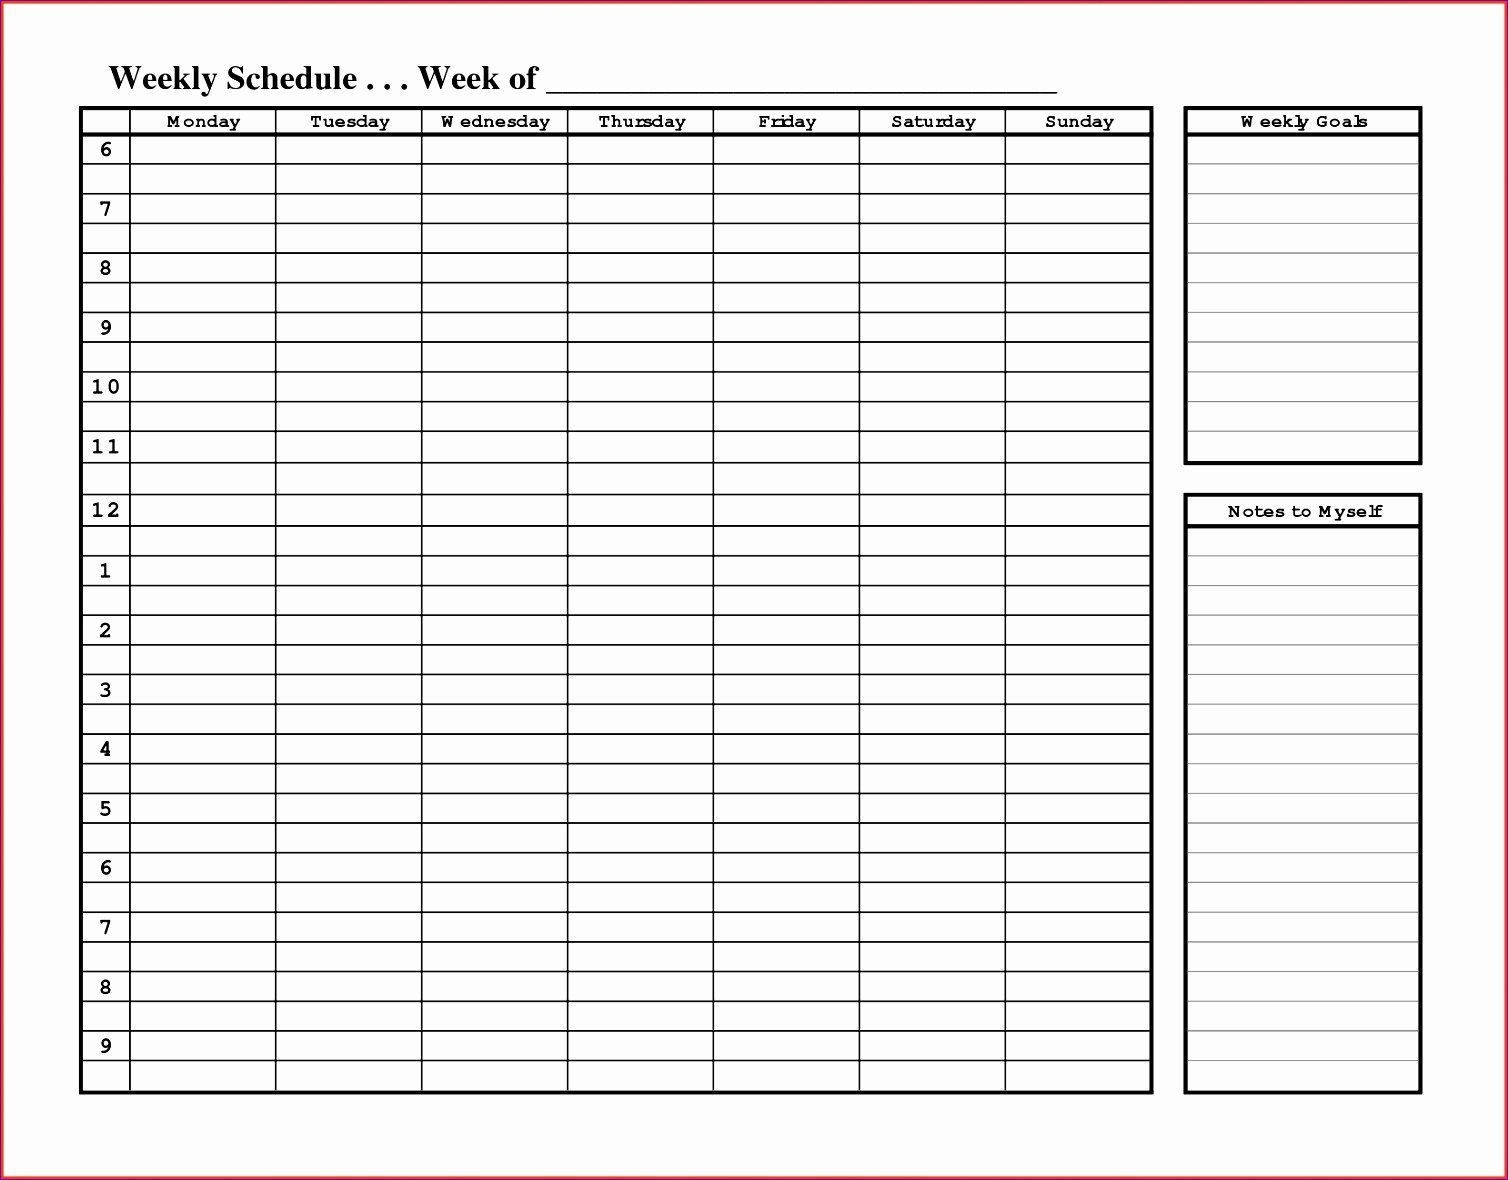 Awesome 24 Hour Daily Schedule Template In 2020 (With Images